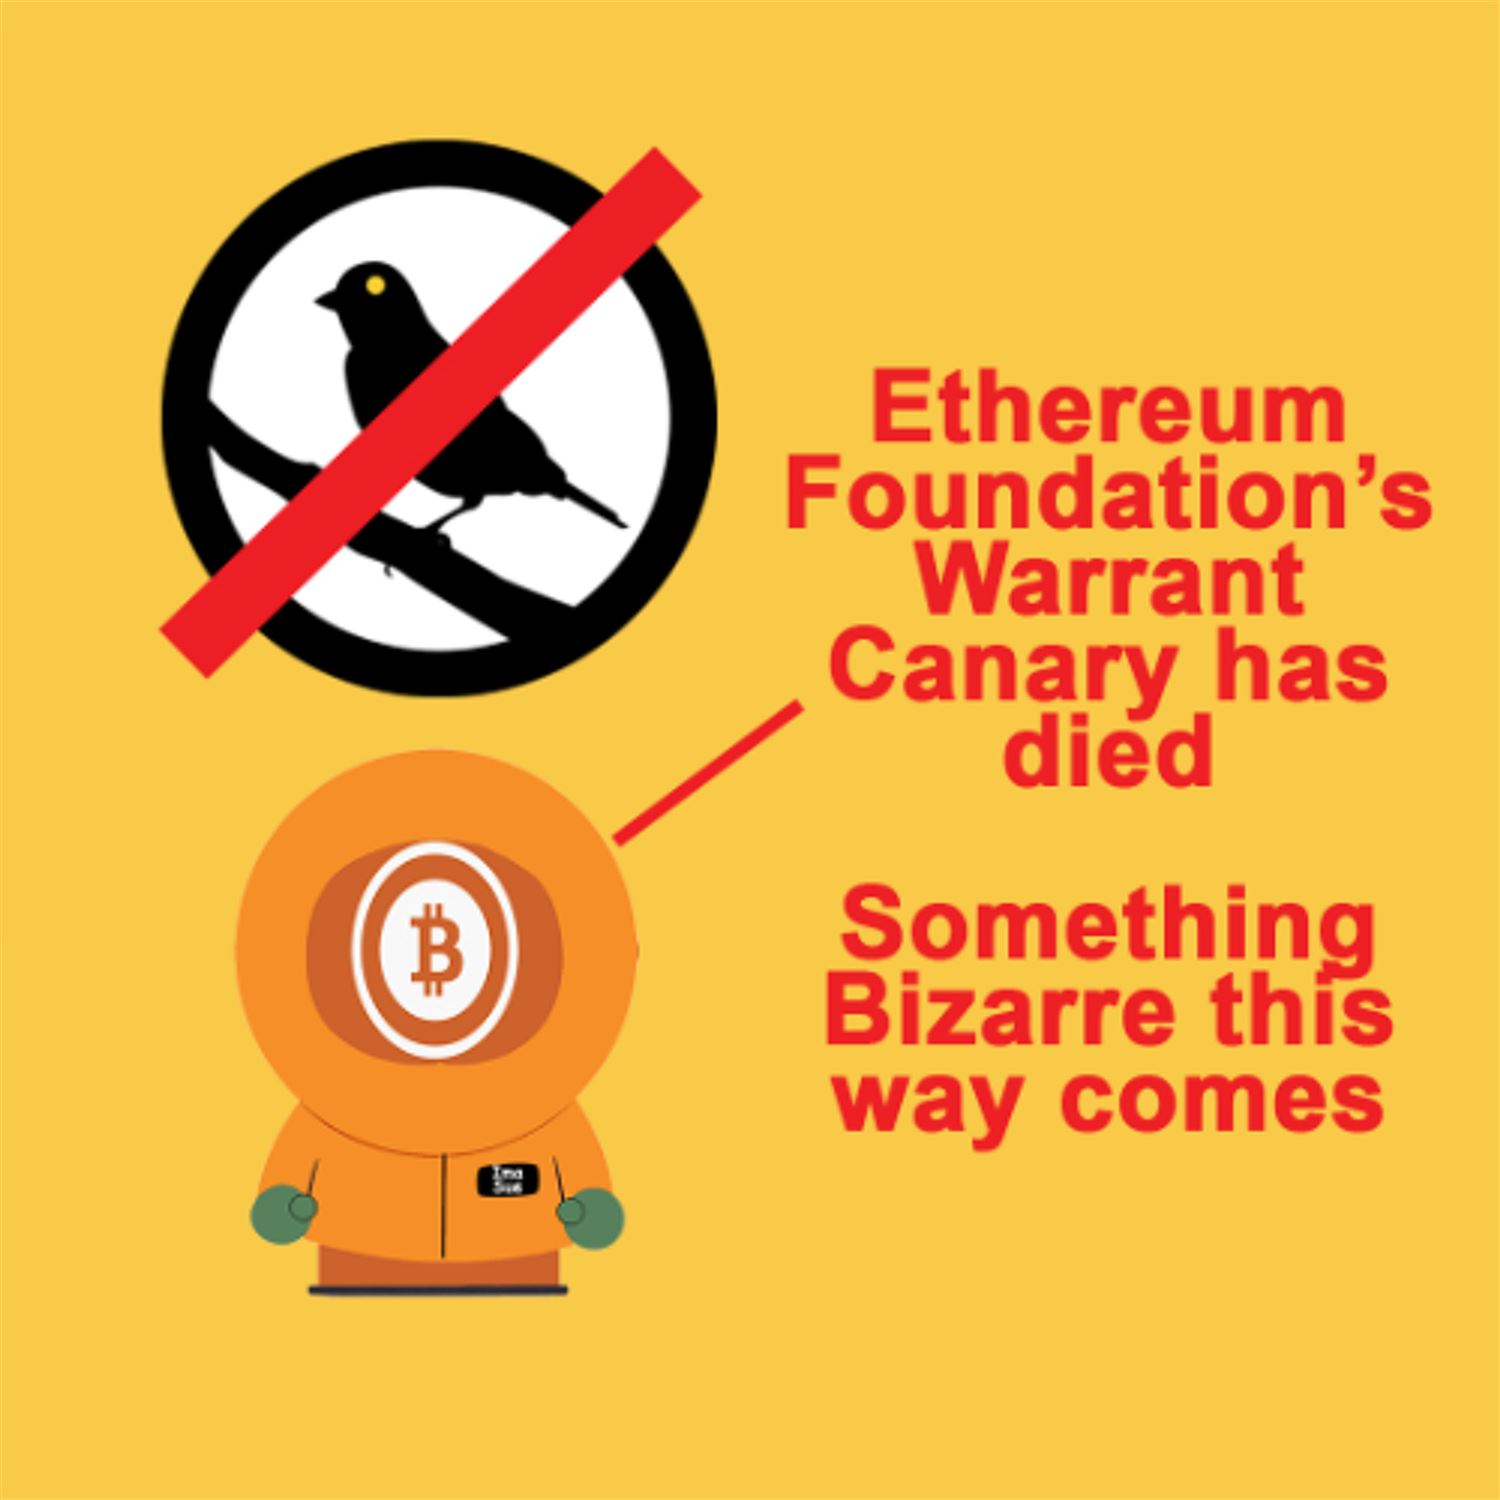 ETH Warrant Canary Died Ep876